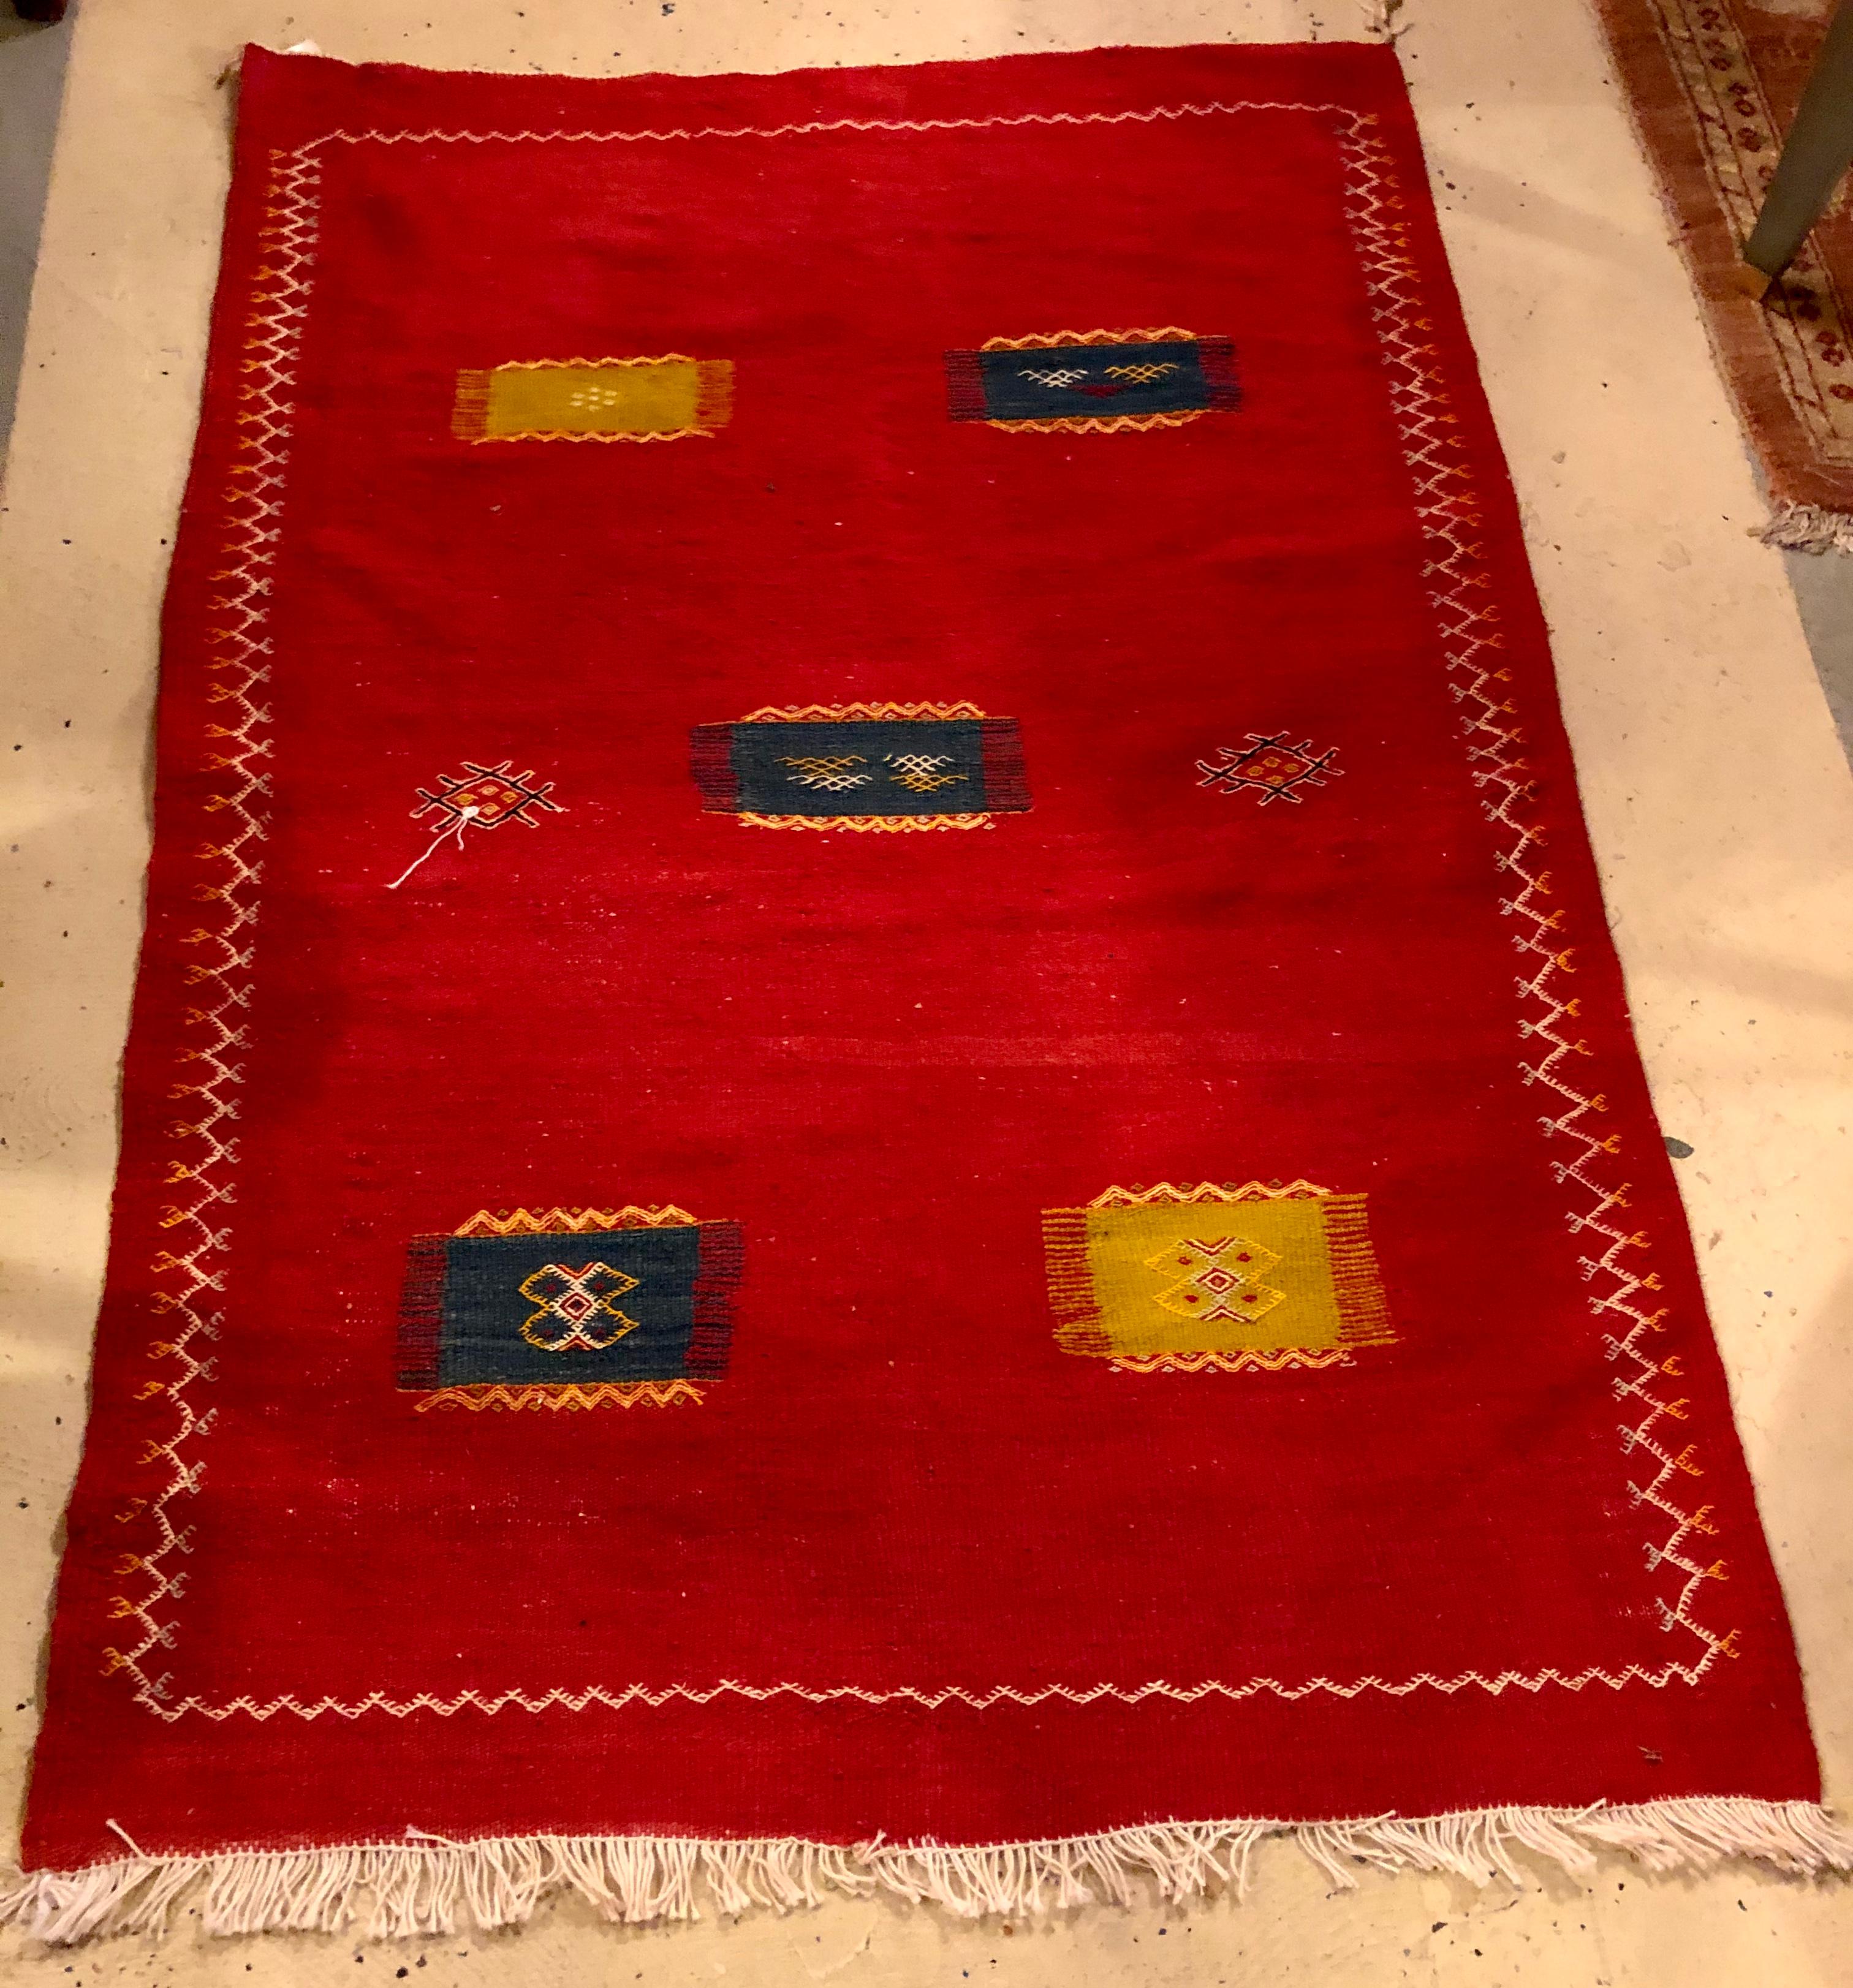 This vintage tribal Moroccan red wool rug or carpet in flat-weave style is form the berber region of the Atlas Mountains in Morocco. Made using the highest-quality 100% sheep's wool, the rug features deep and vivid all-natural vegetable dyes in red